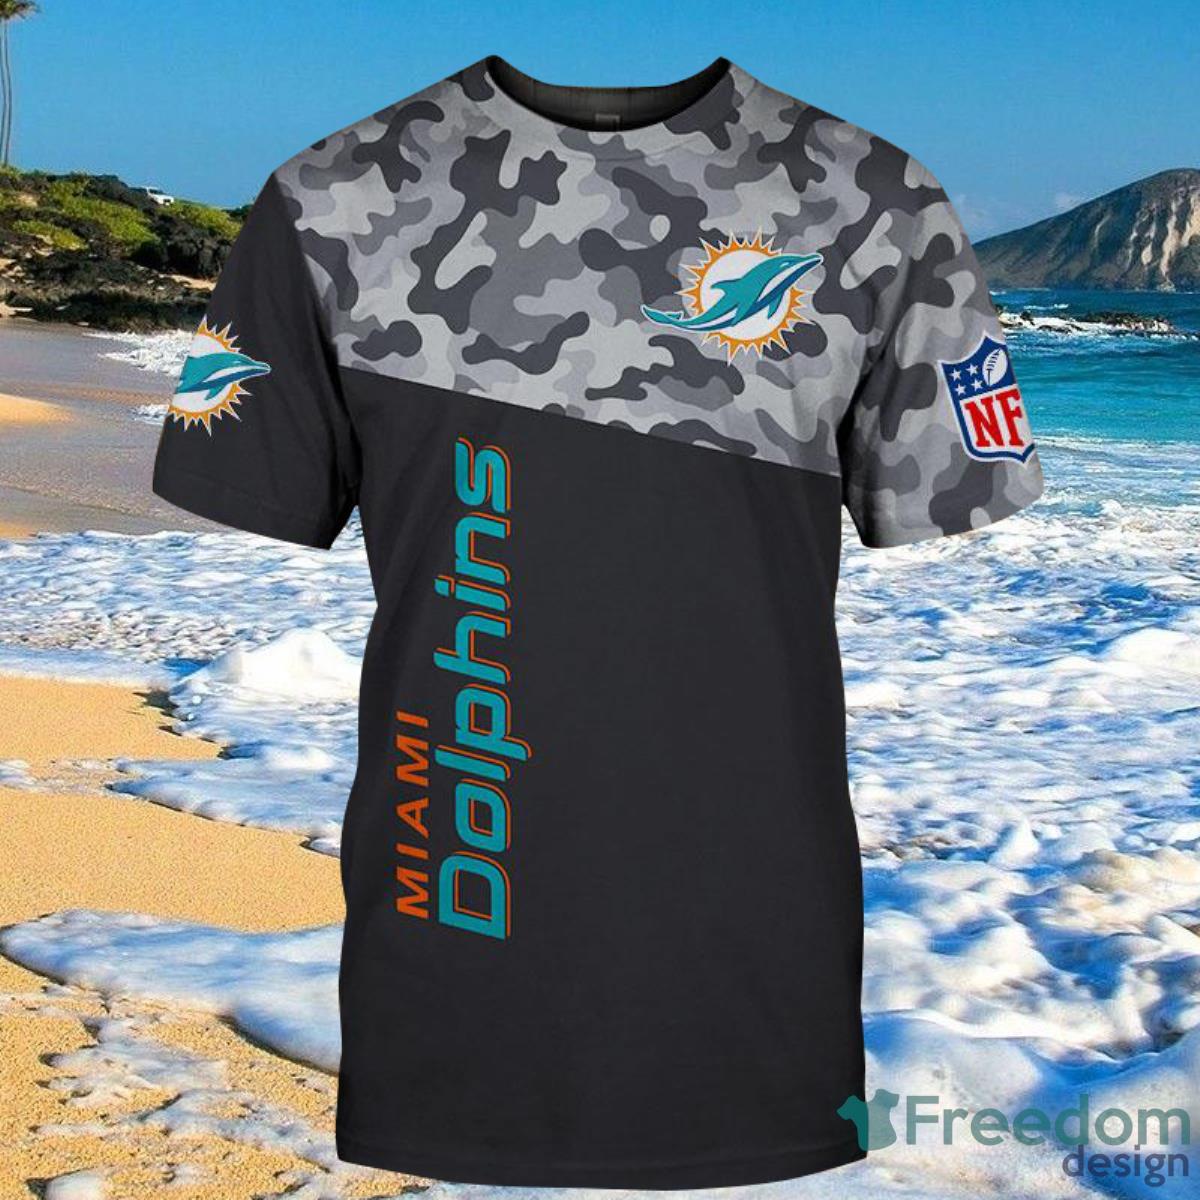 miami dolphins tickets military